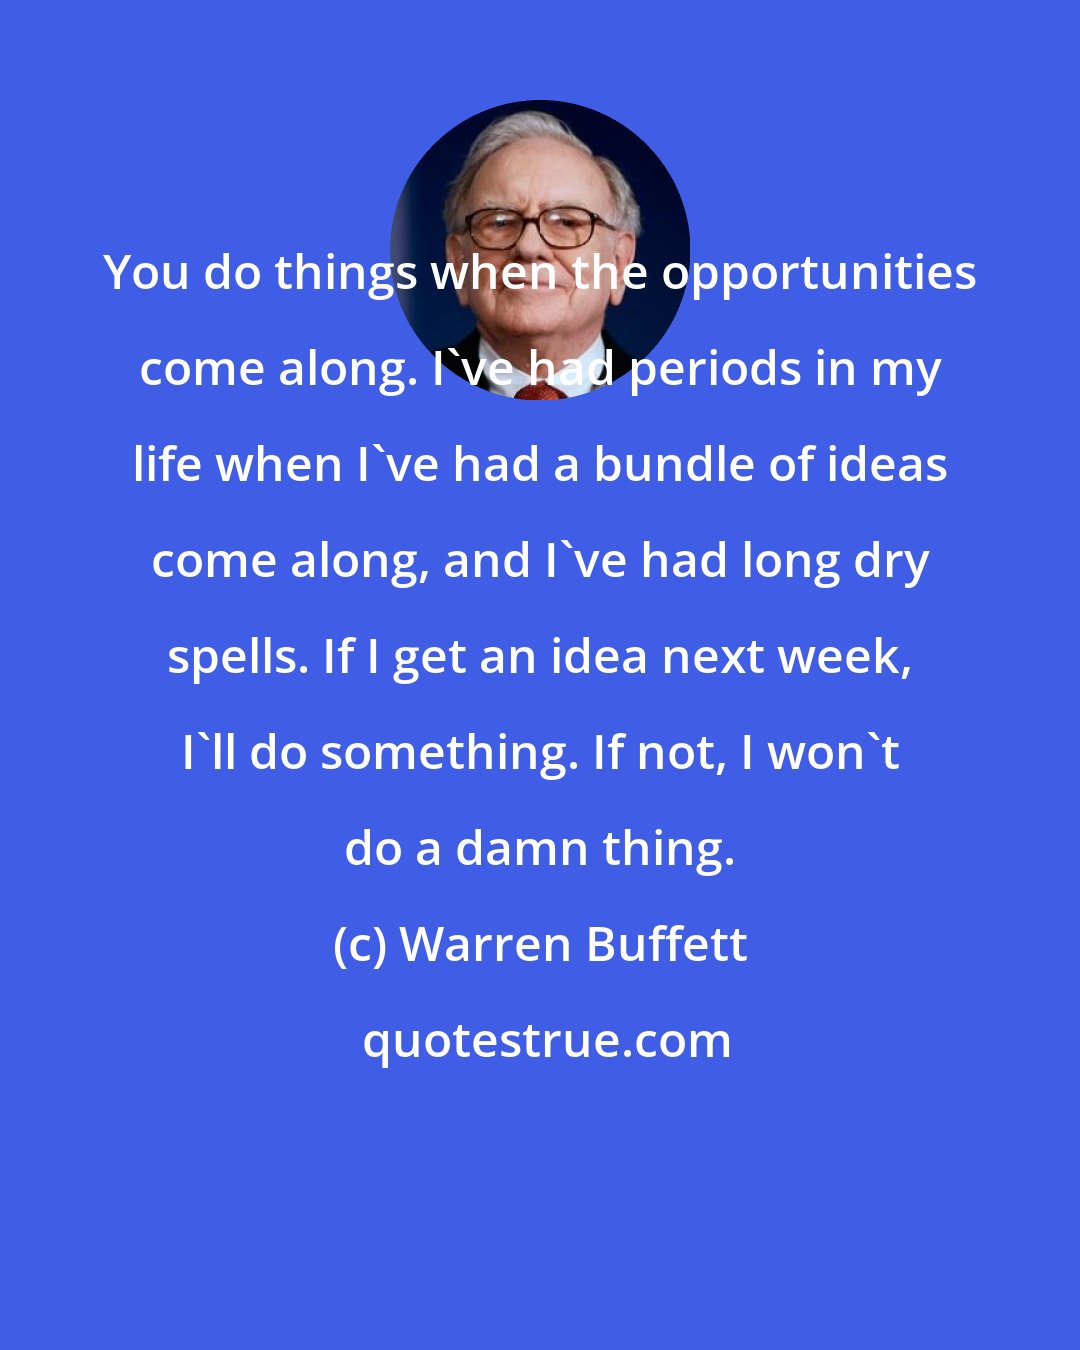 Warren Buffett: You do things when the opportunities come along. I've had periods in my life when I've had a bundle of ideas come along, and I've had long dry spells. If I get an idea next week, I'll do something. If not, I won't do a damn thing.